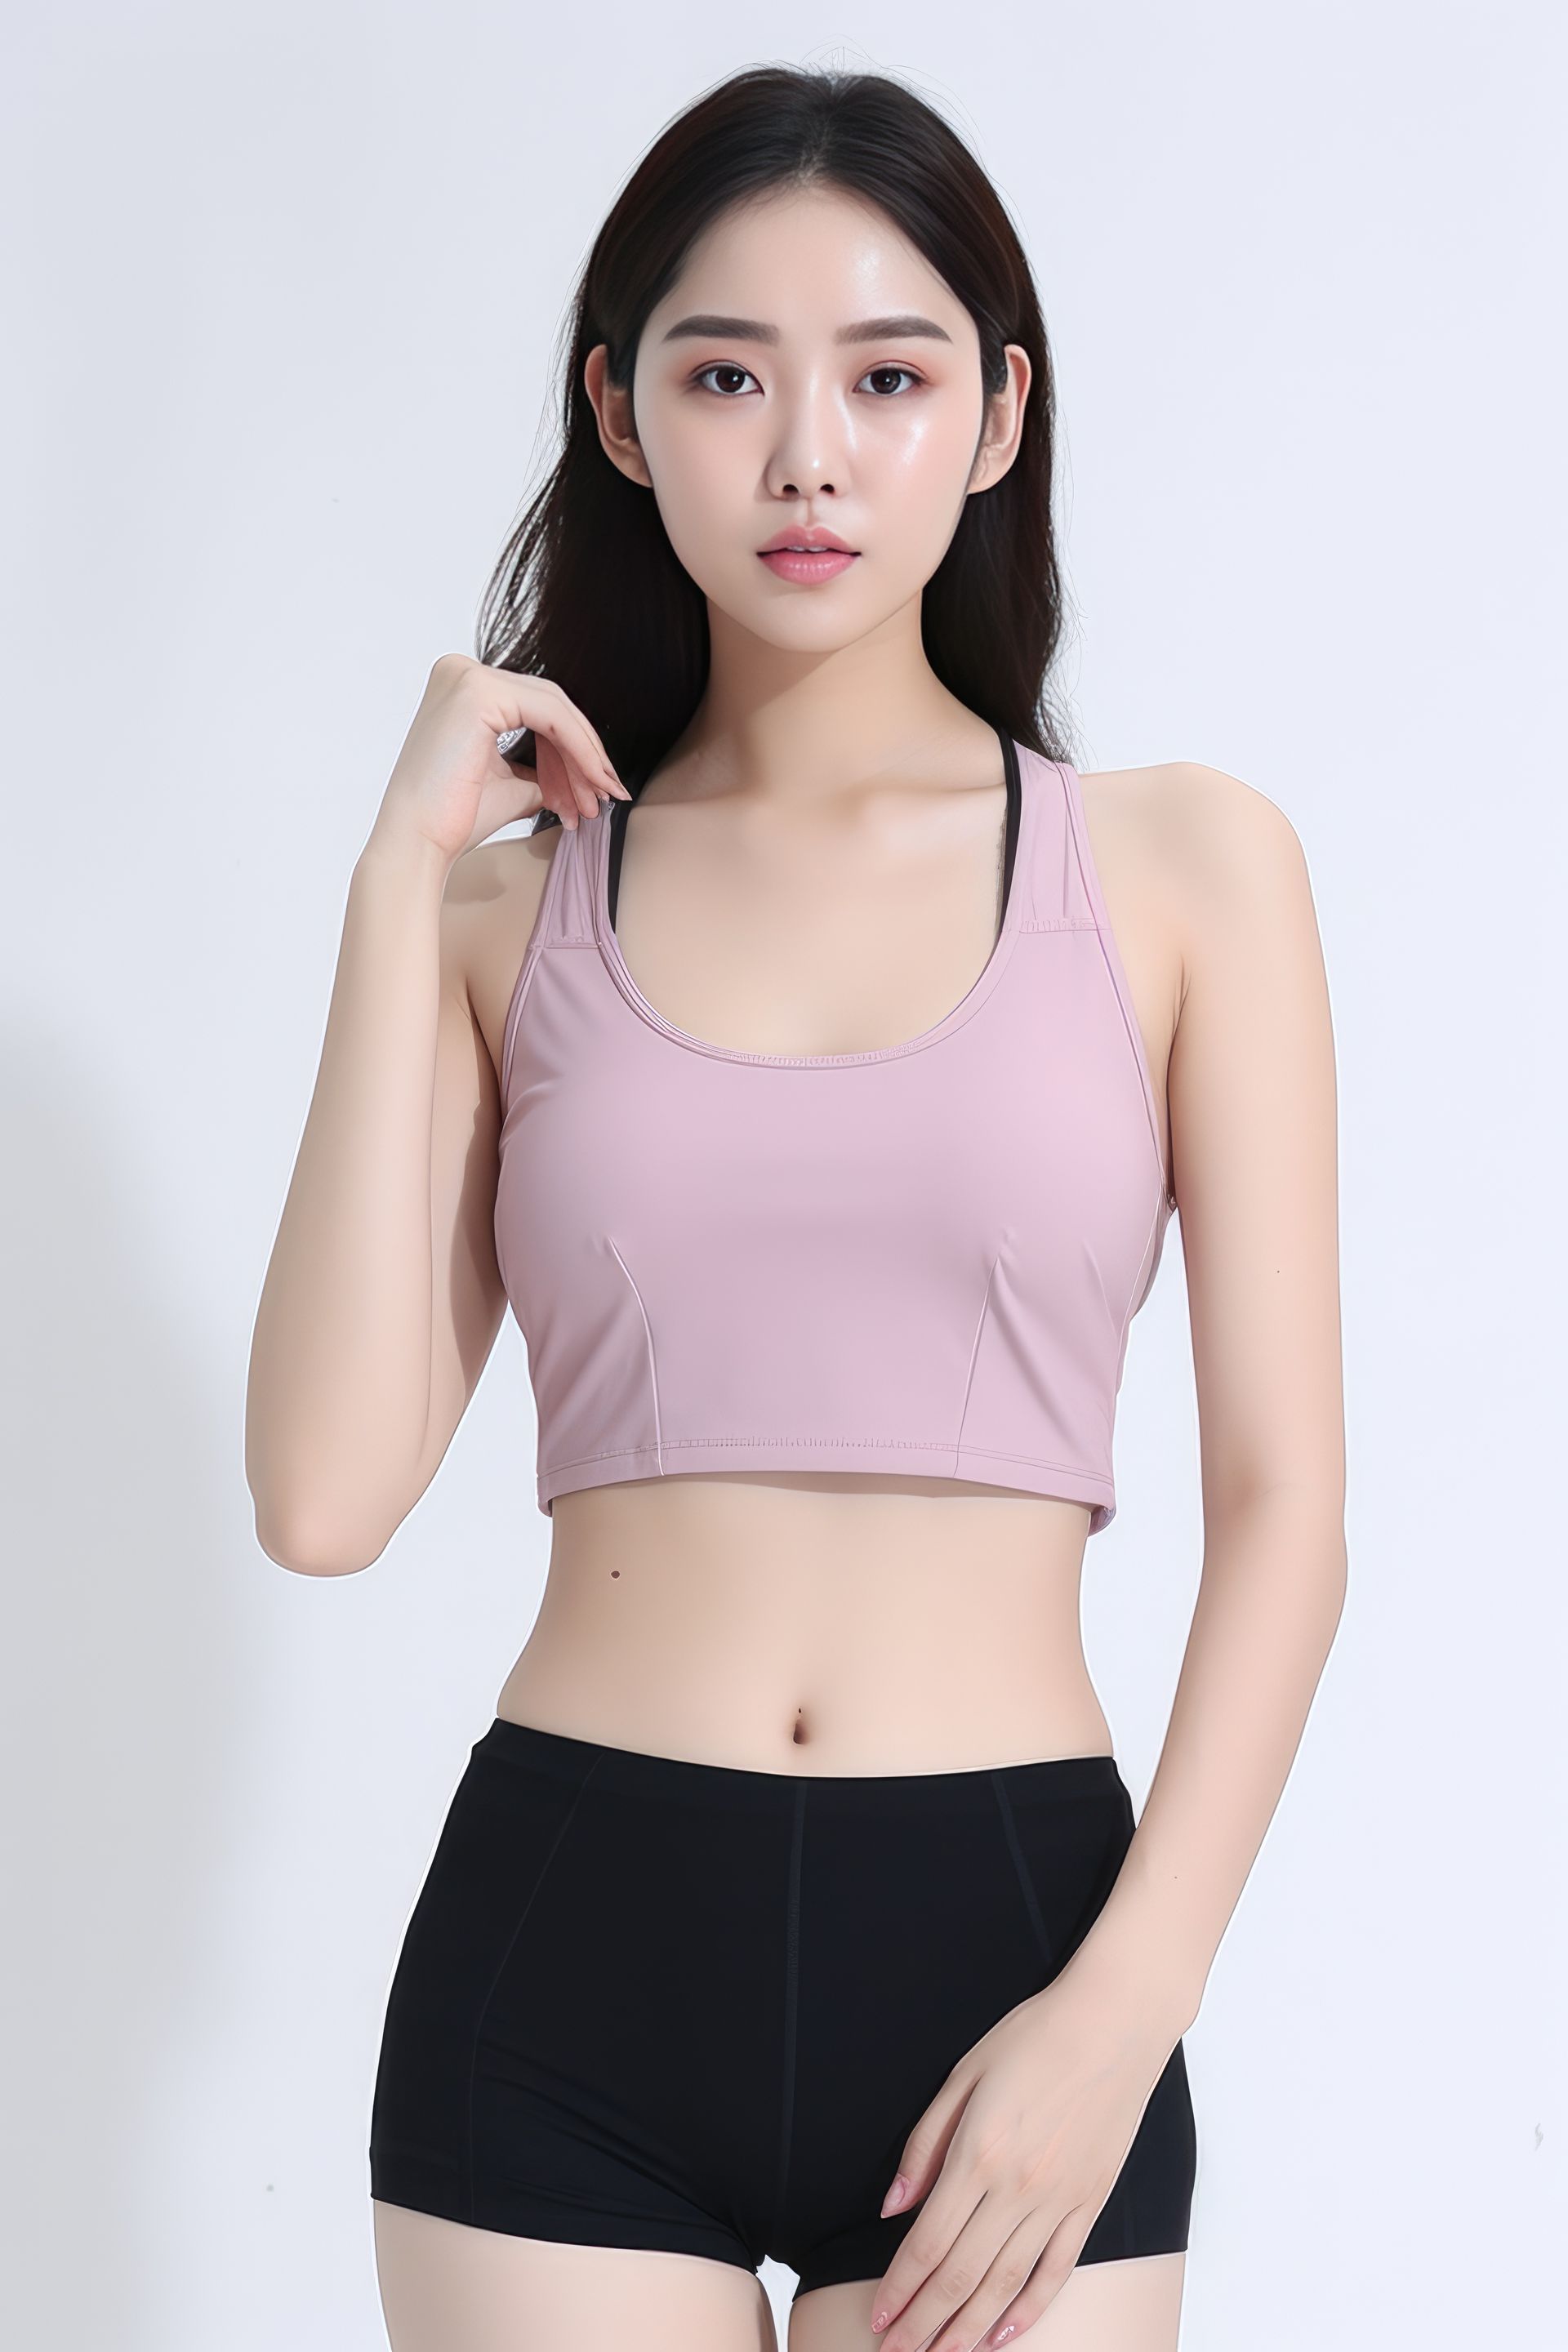 a woman is wearing a pink crop top and black shorts .